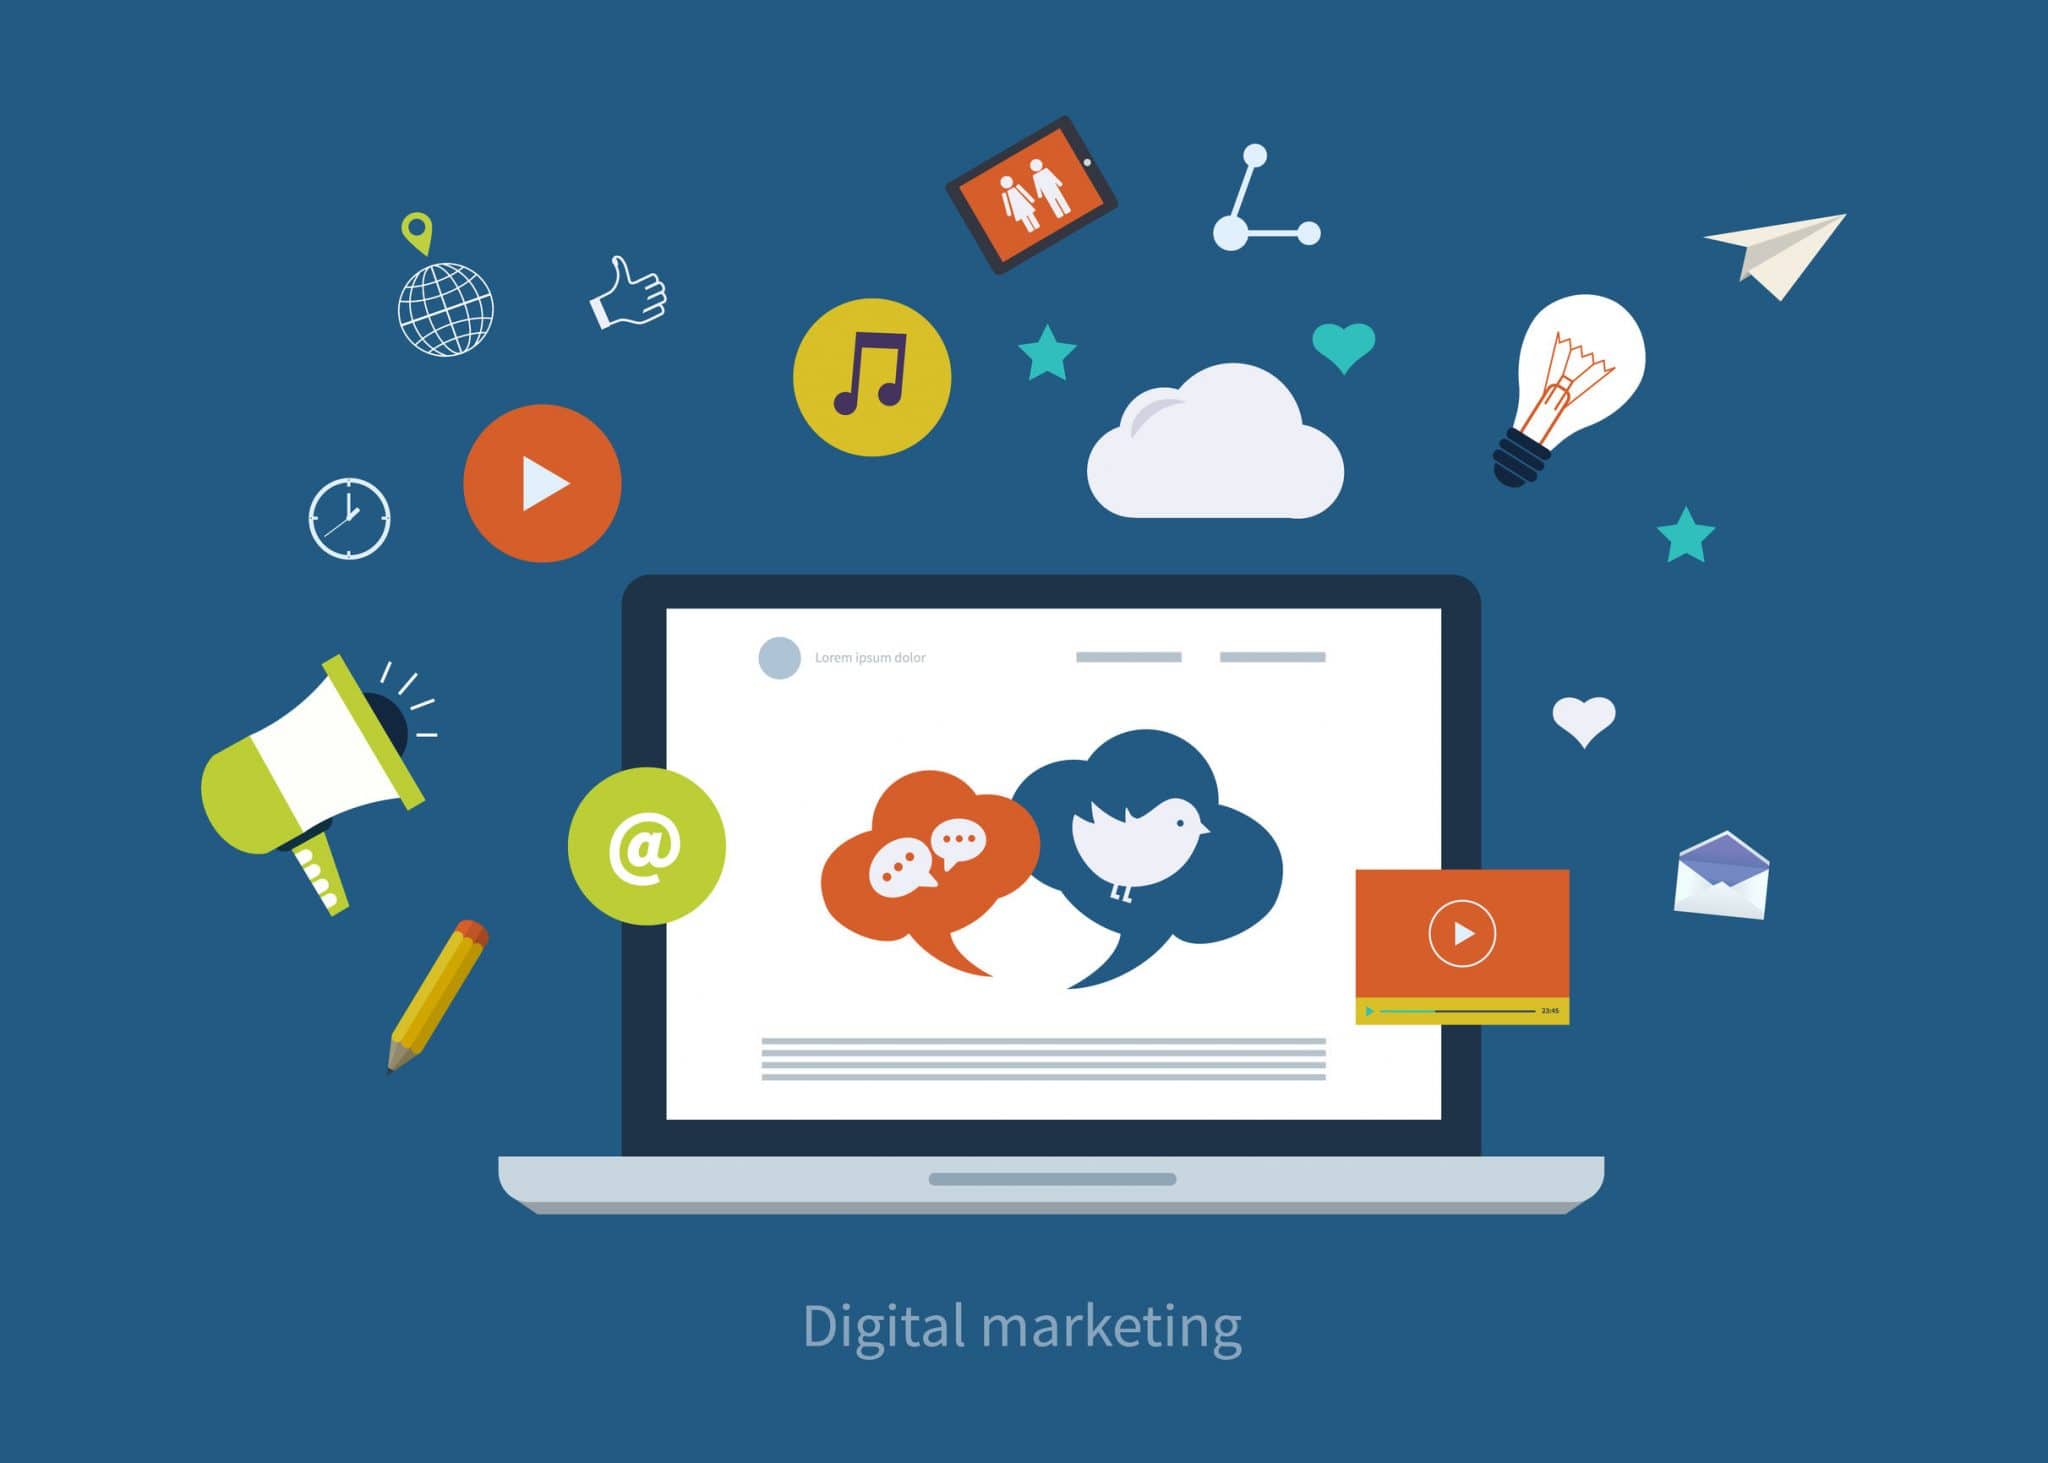 Creative Content Marketing: 4 Types of Digital Content - Business 2